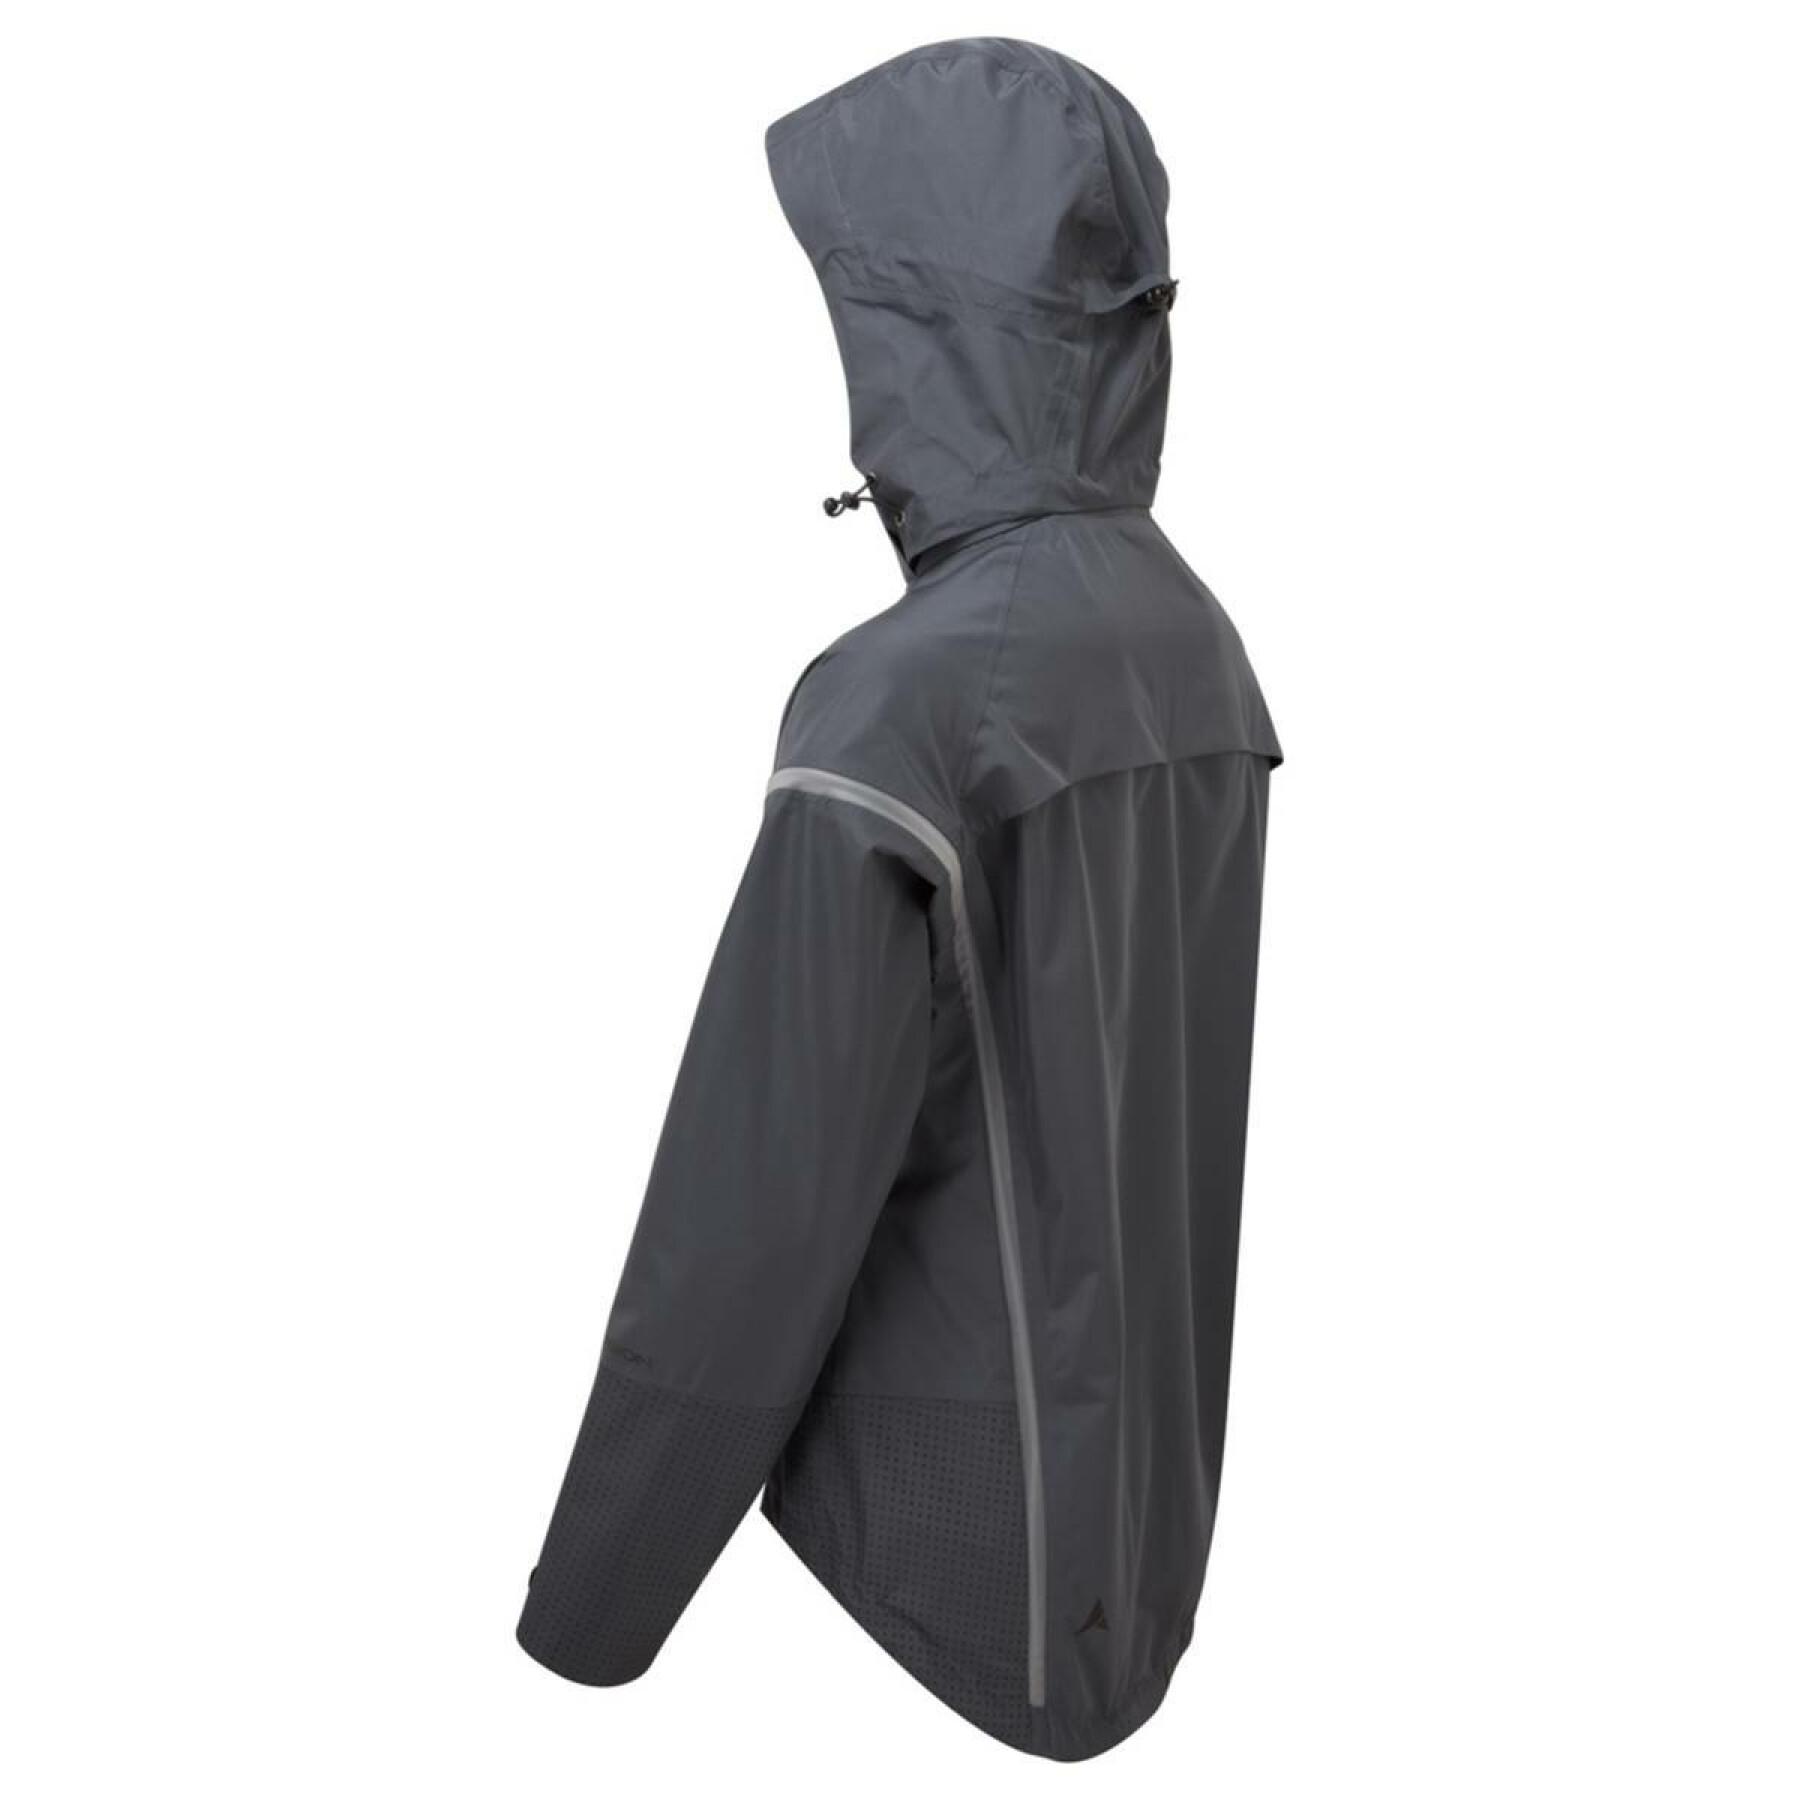 Chaqueta impermeable mujer Altura Nightvision Electron